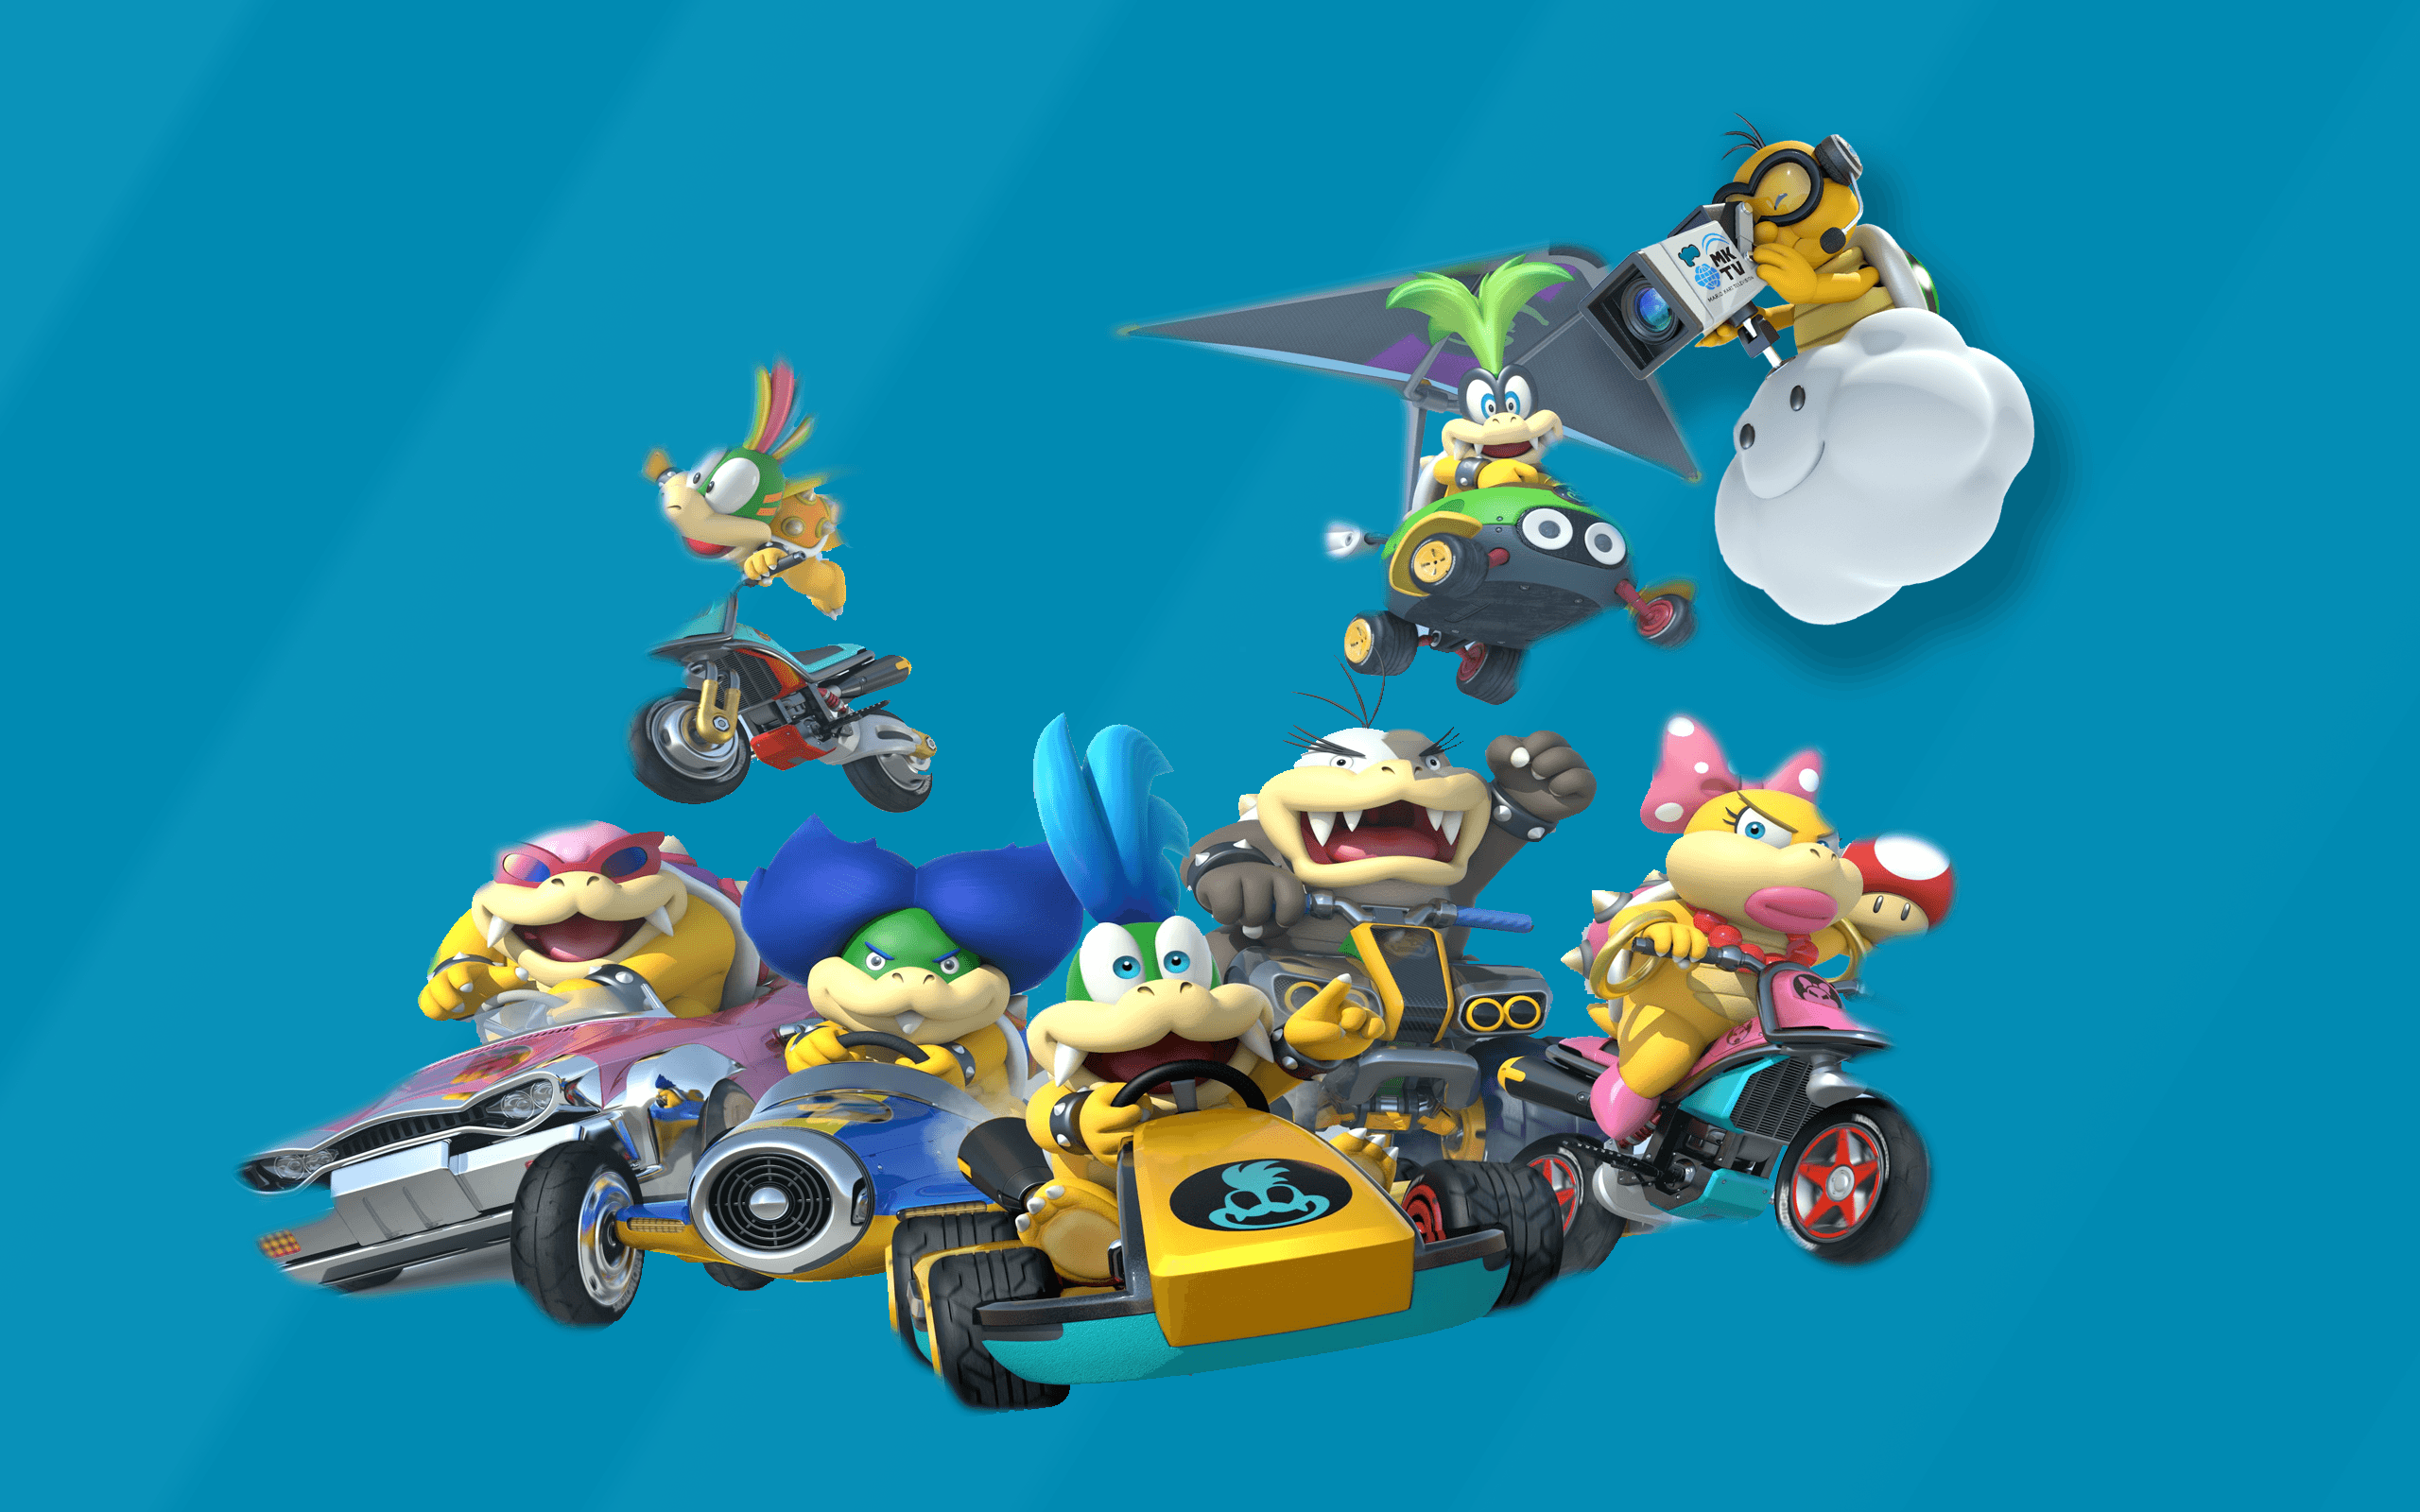 FANART: The Koopalings race to your screen in this Mario Kart 8